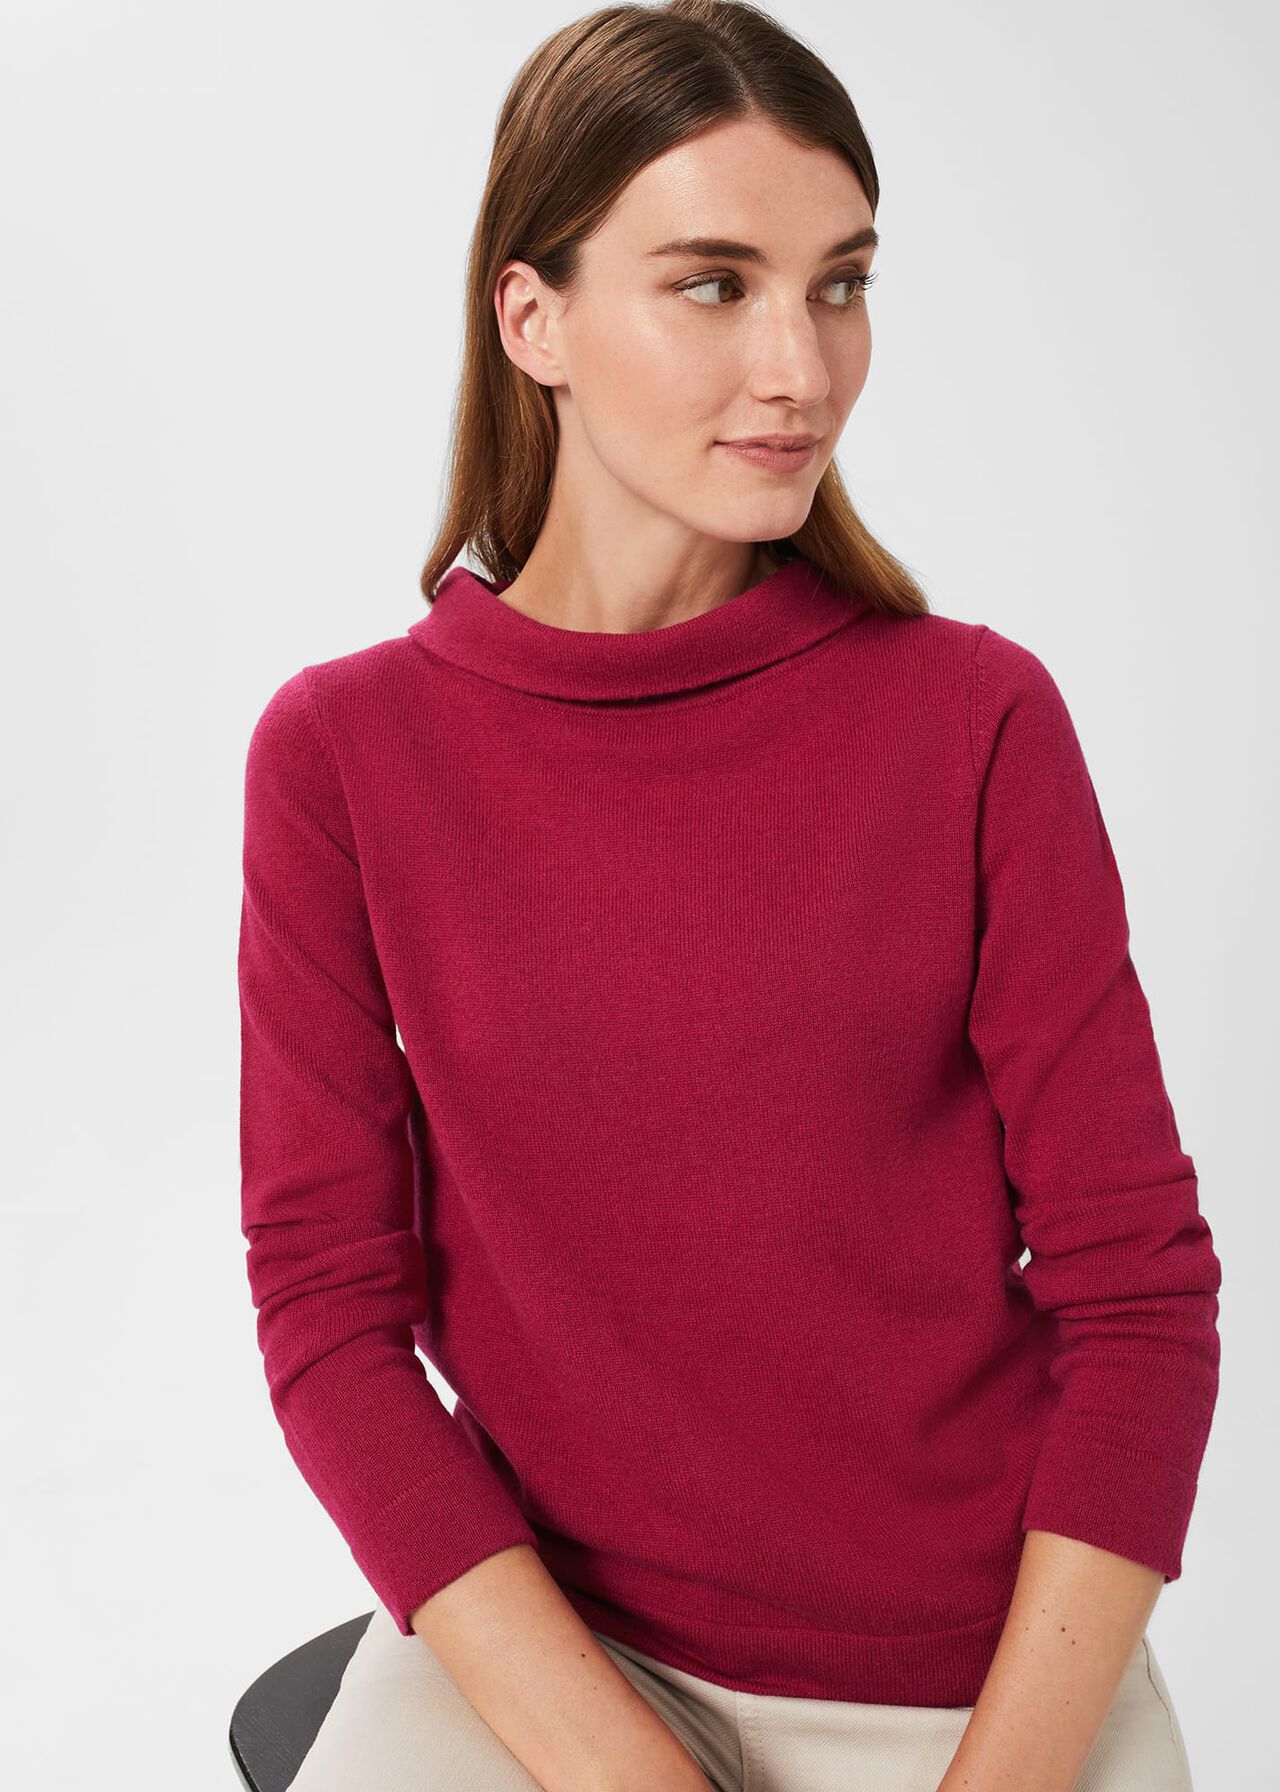 Audrey Wool Cashmere Jumper, Rich Berry Red, hi-res